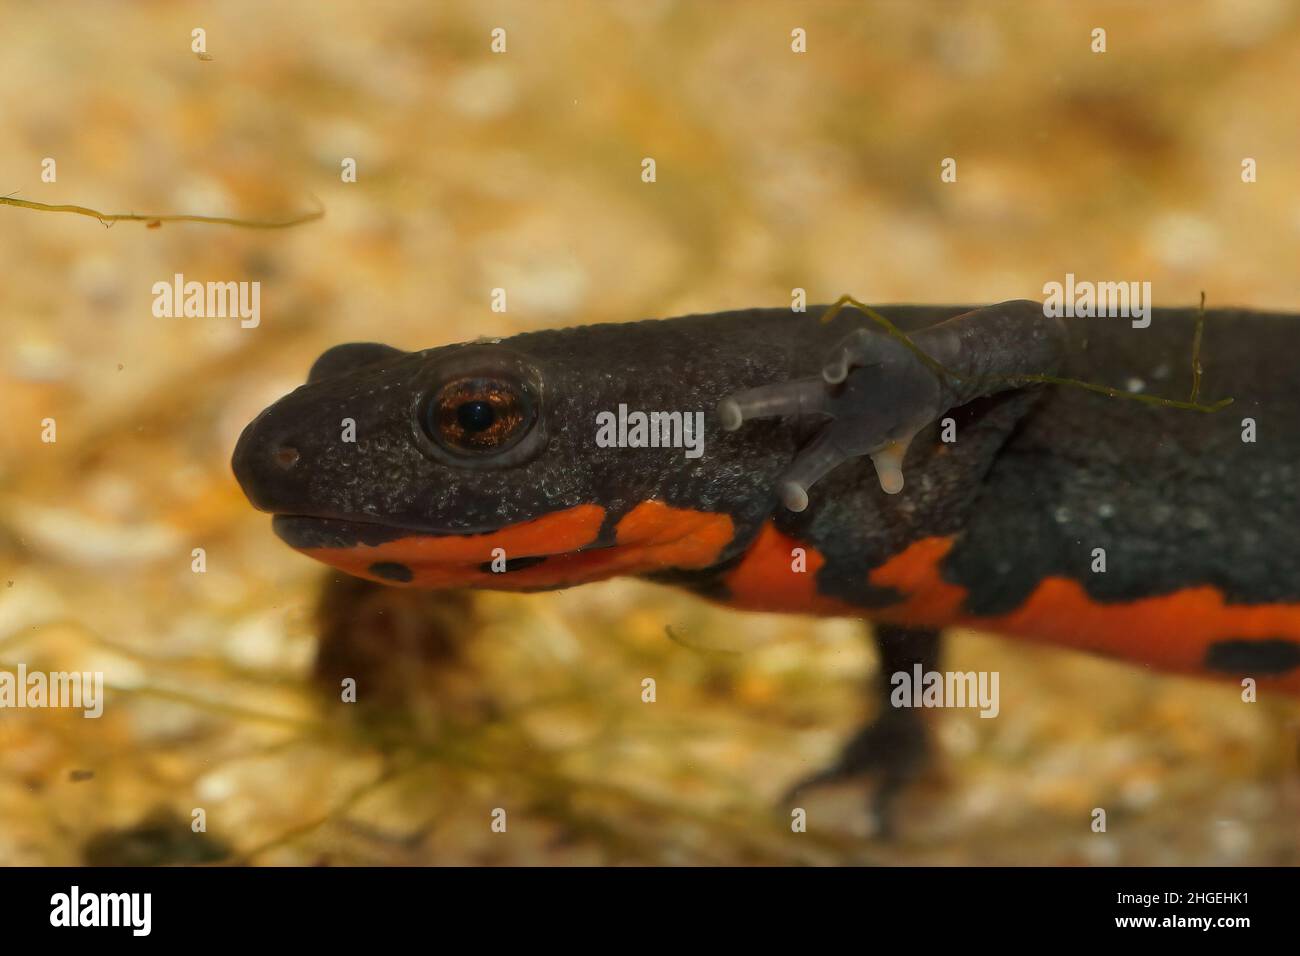 Closeup on an small black aquatic Chinese fire-bellied newt , Cynops orientalis , underwater Stock Photo